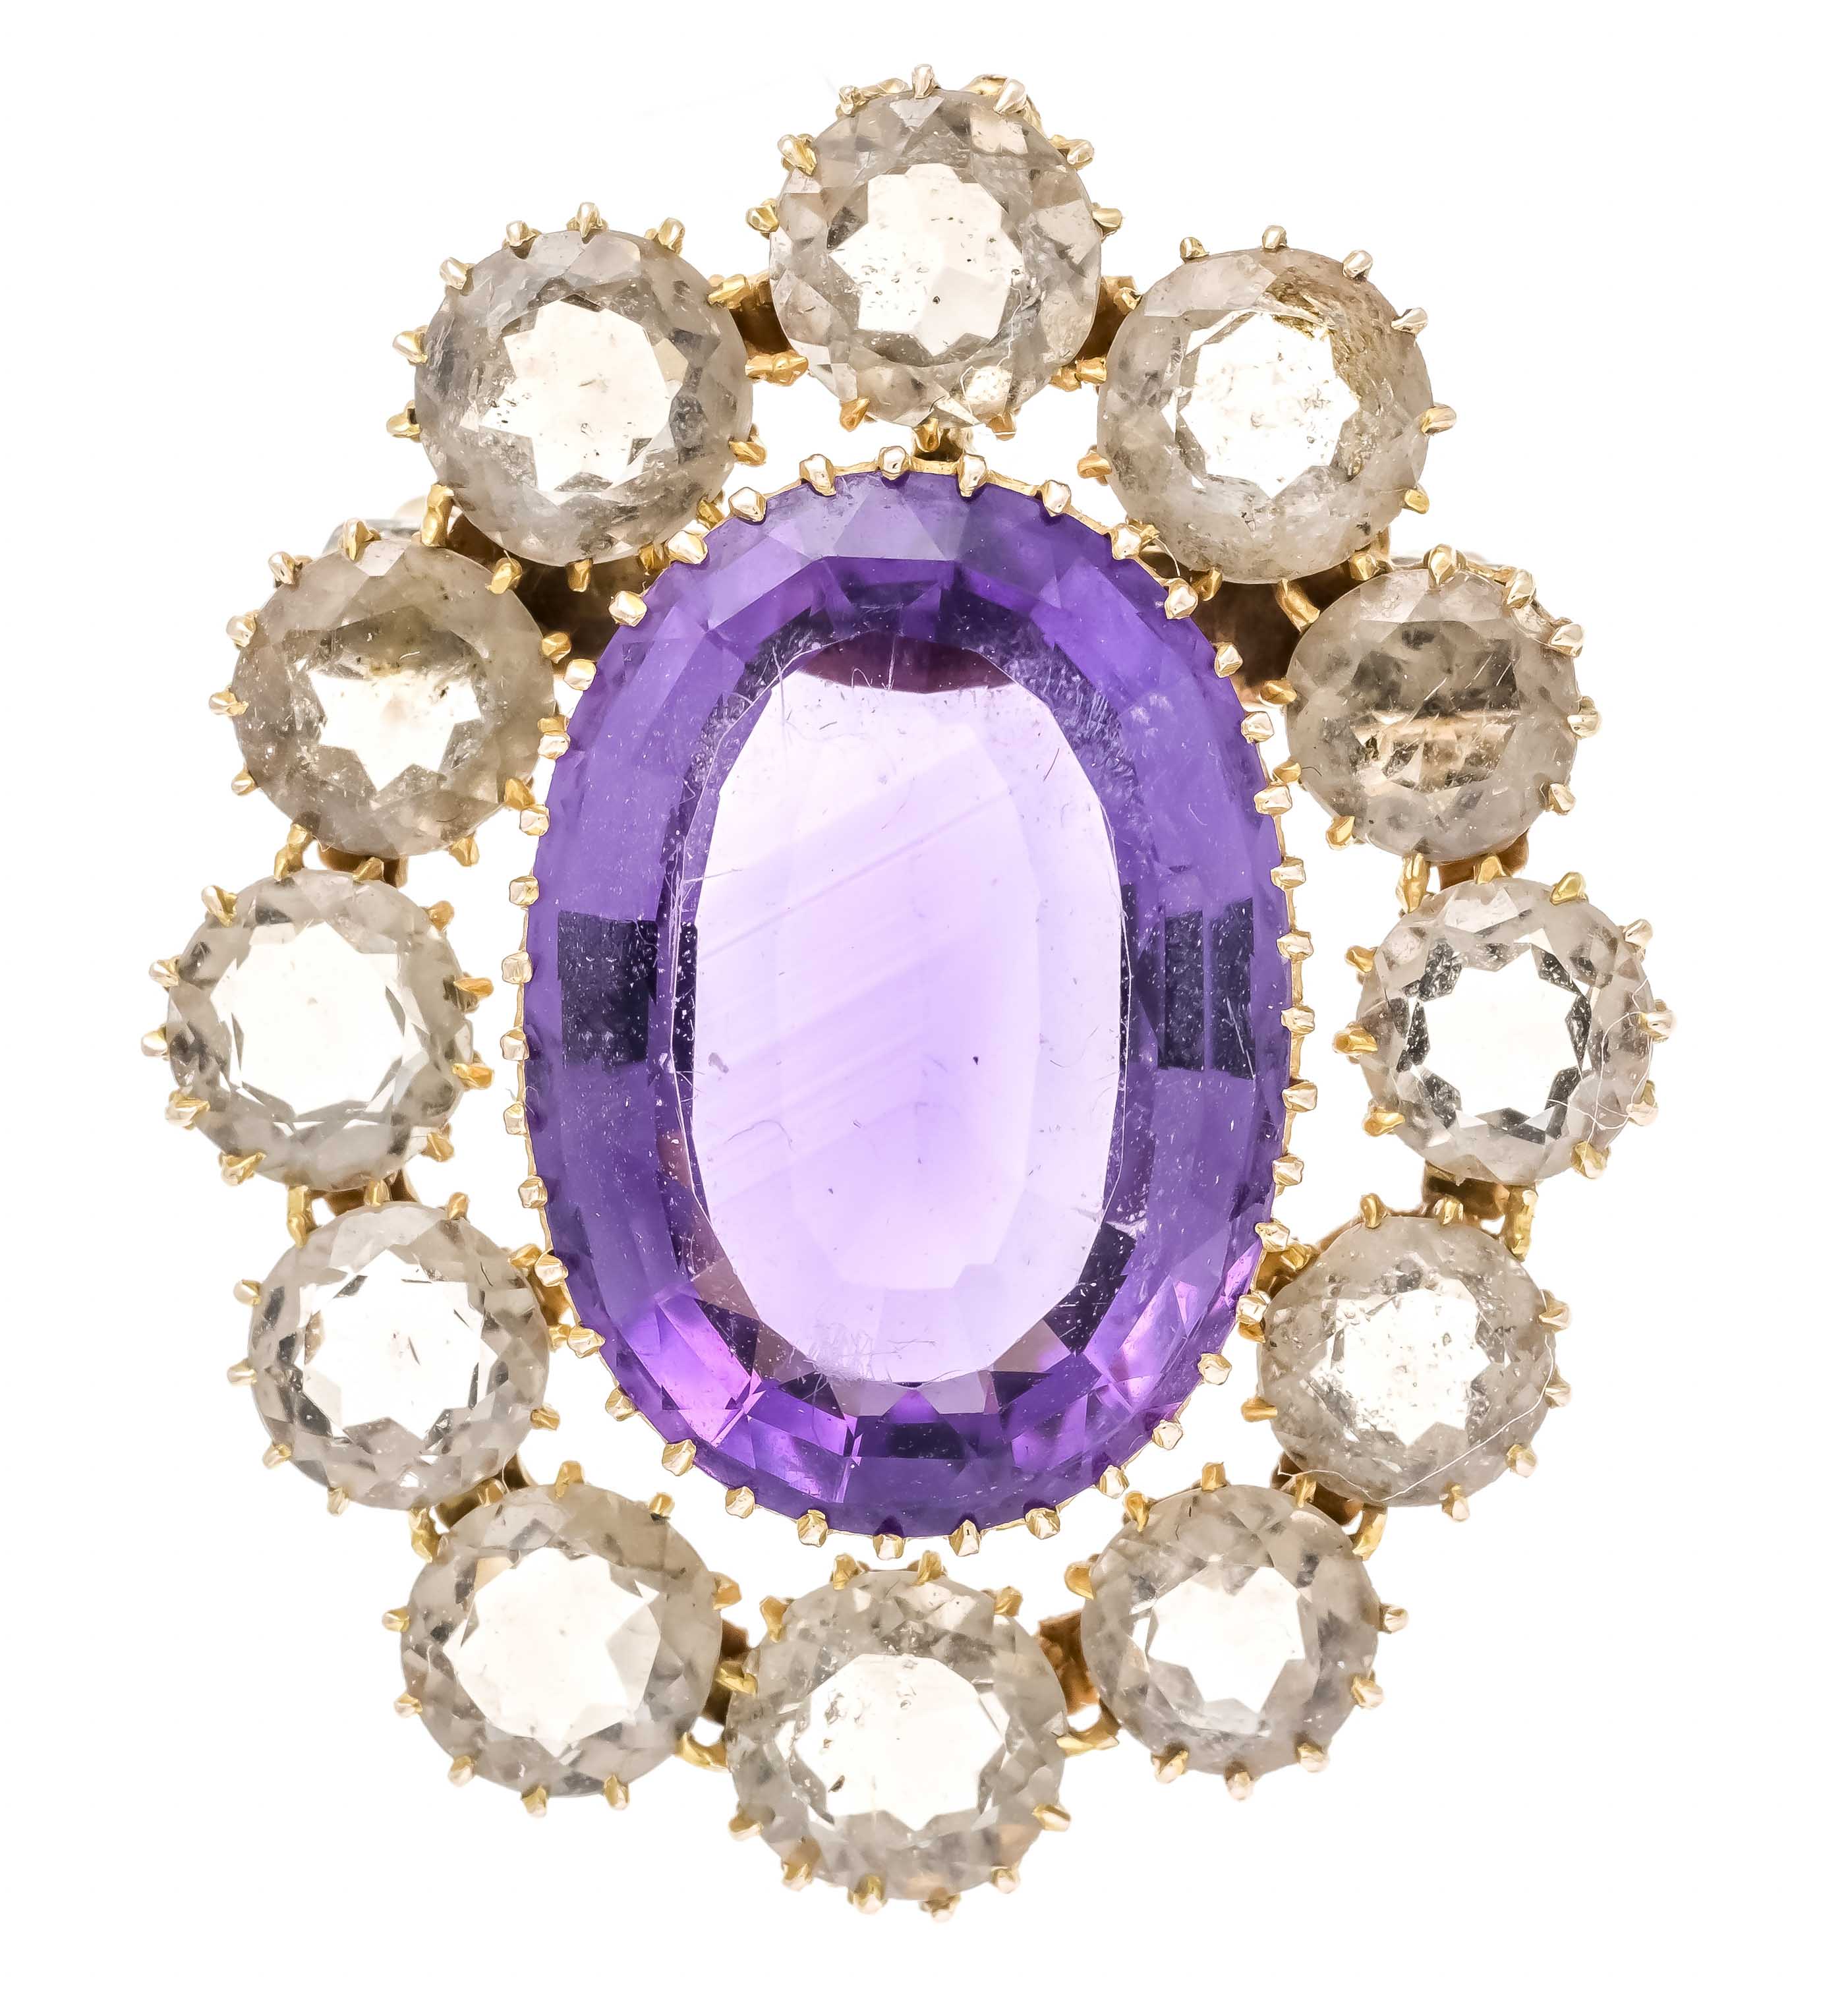 Amethyst brooch GG 585/000 with brooch silver-gilt, unstamped, tested, set with an oval faceted